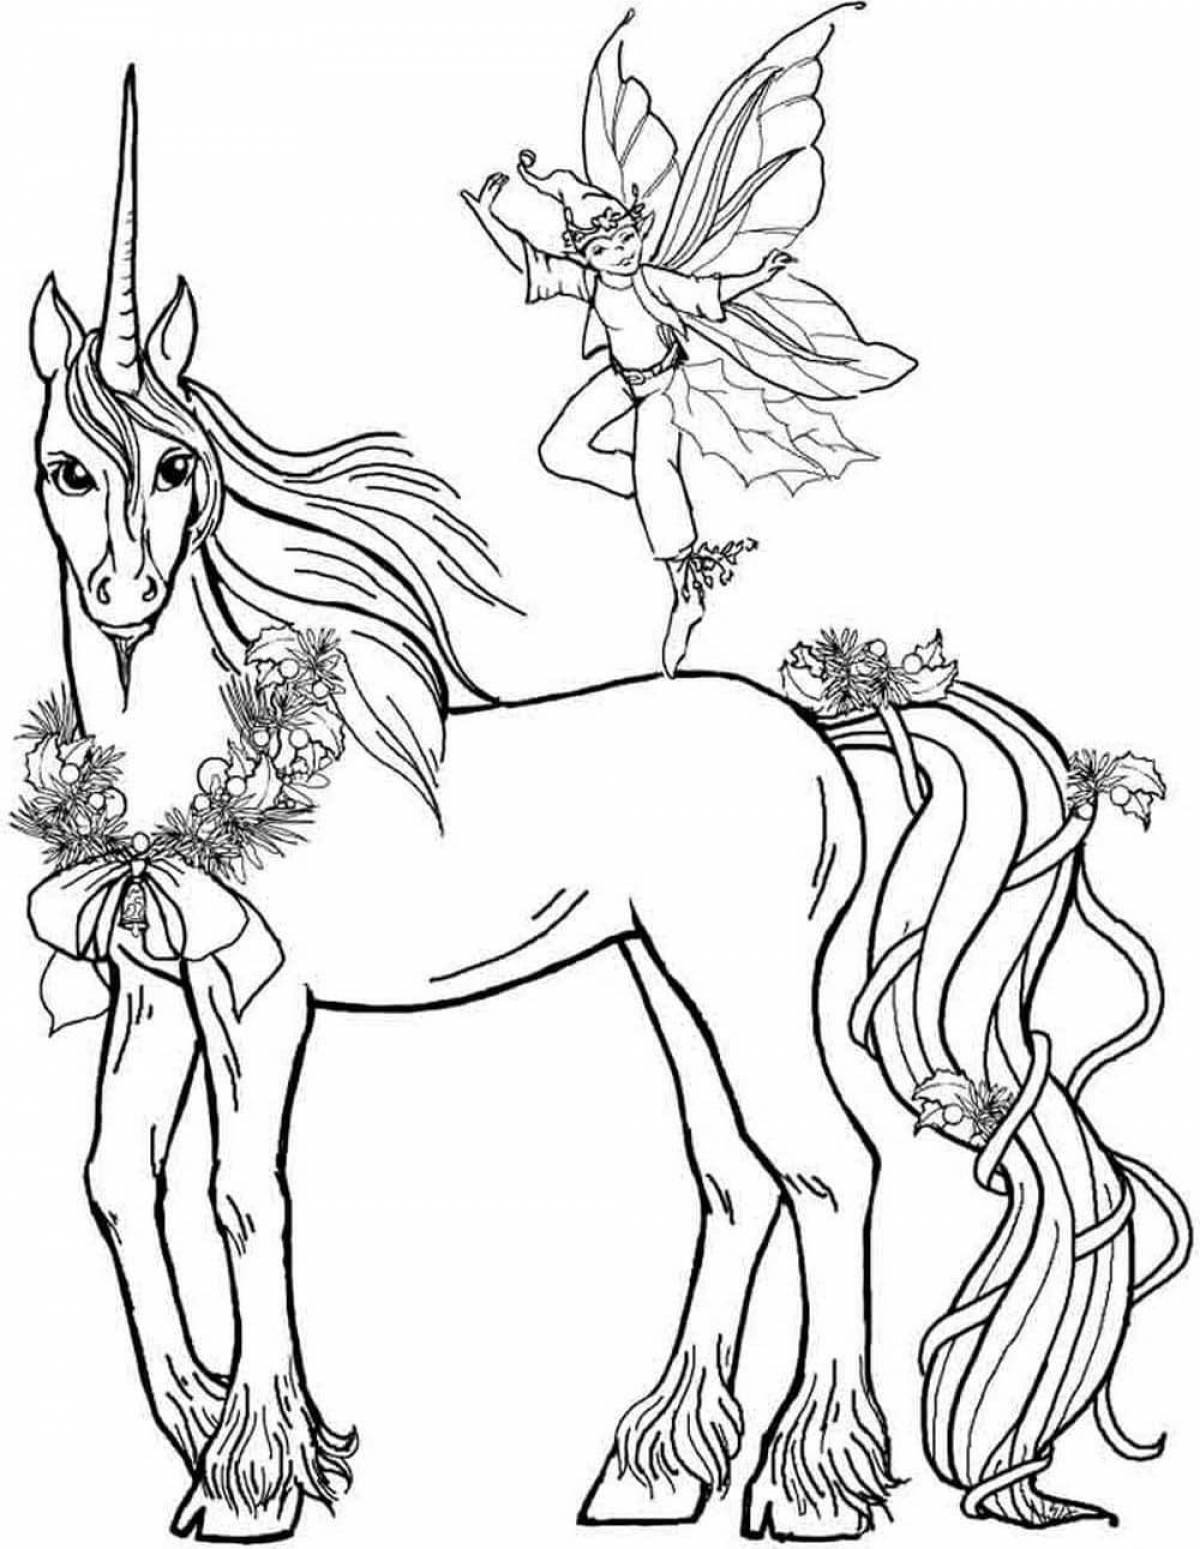 Fluffy coloring pages fairies and unicorns